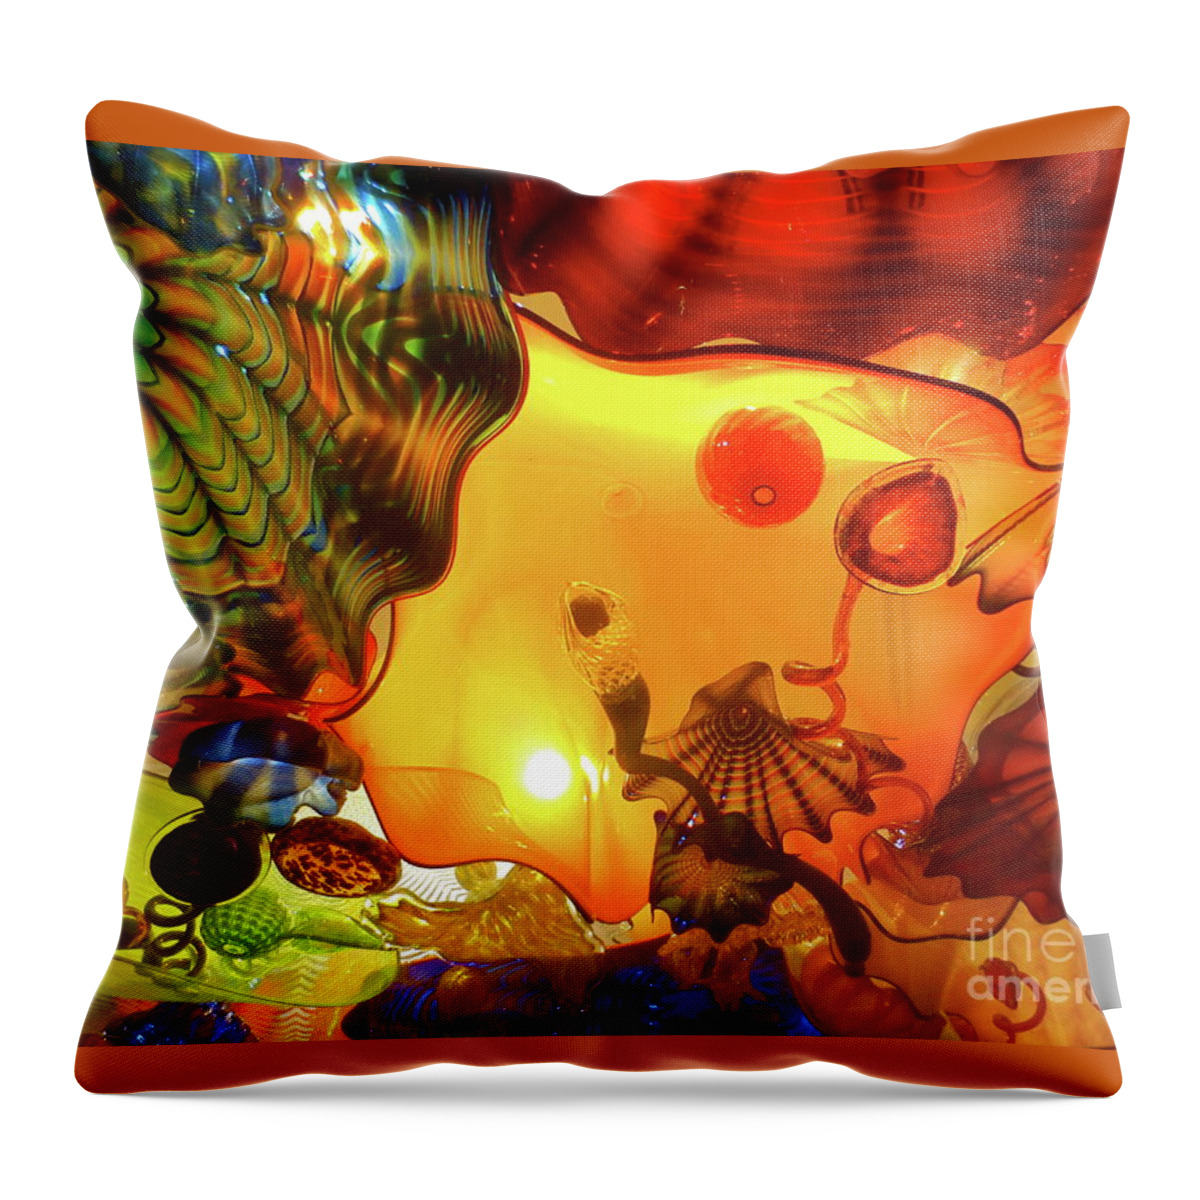  Throw Pillow featuring the photograph Dale Chihuly Glass Sculptures by Robert Birkenes